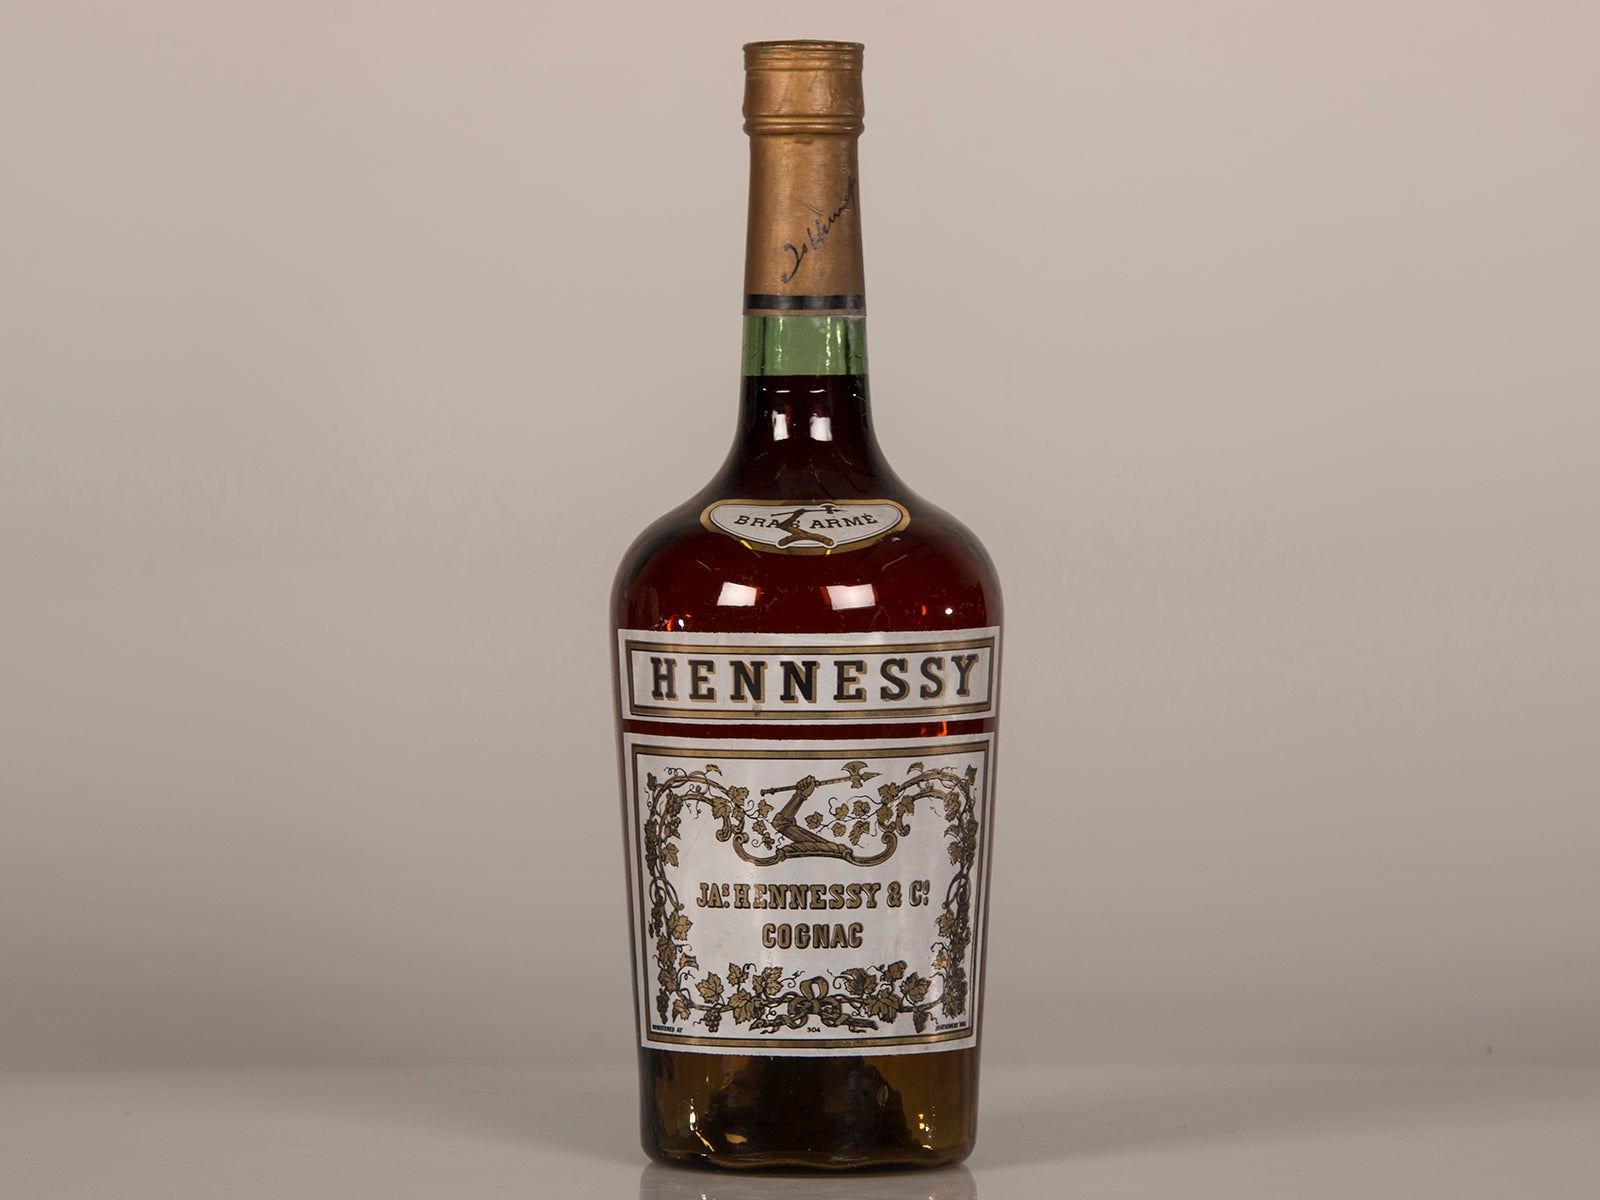 Large Replica Bottle of "Hennessy" Brand Cognac from France ca. 1940